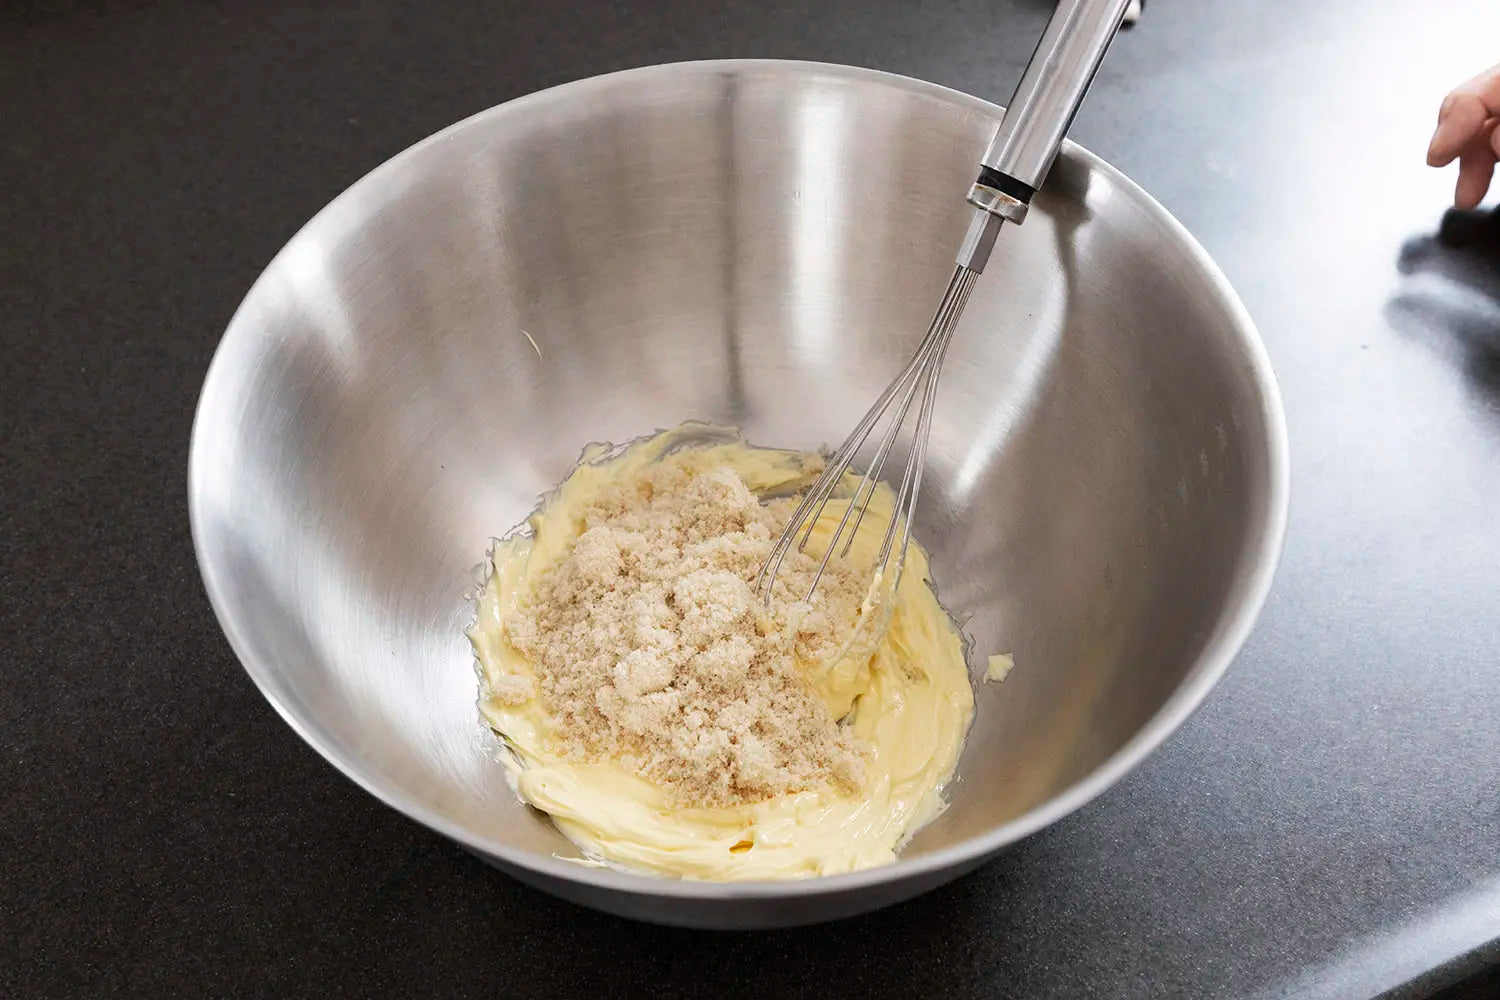 Adding sugar to butter